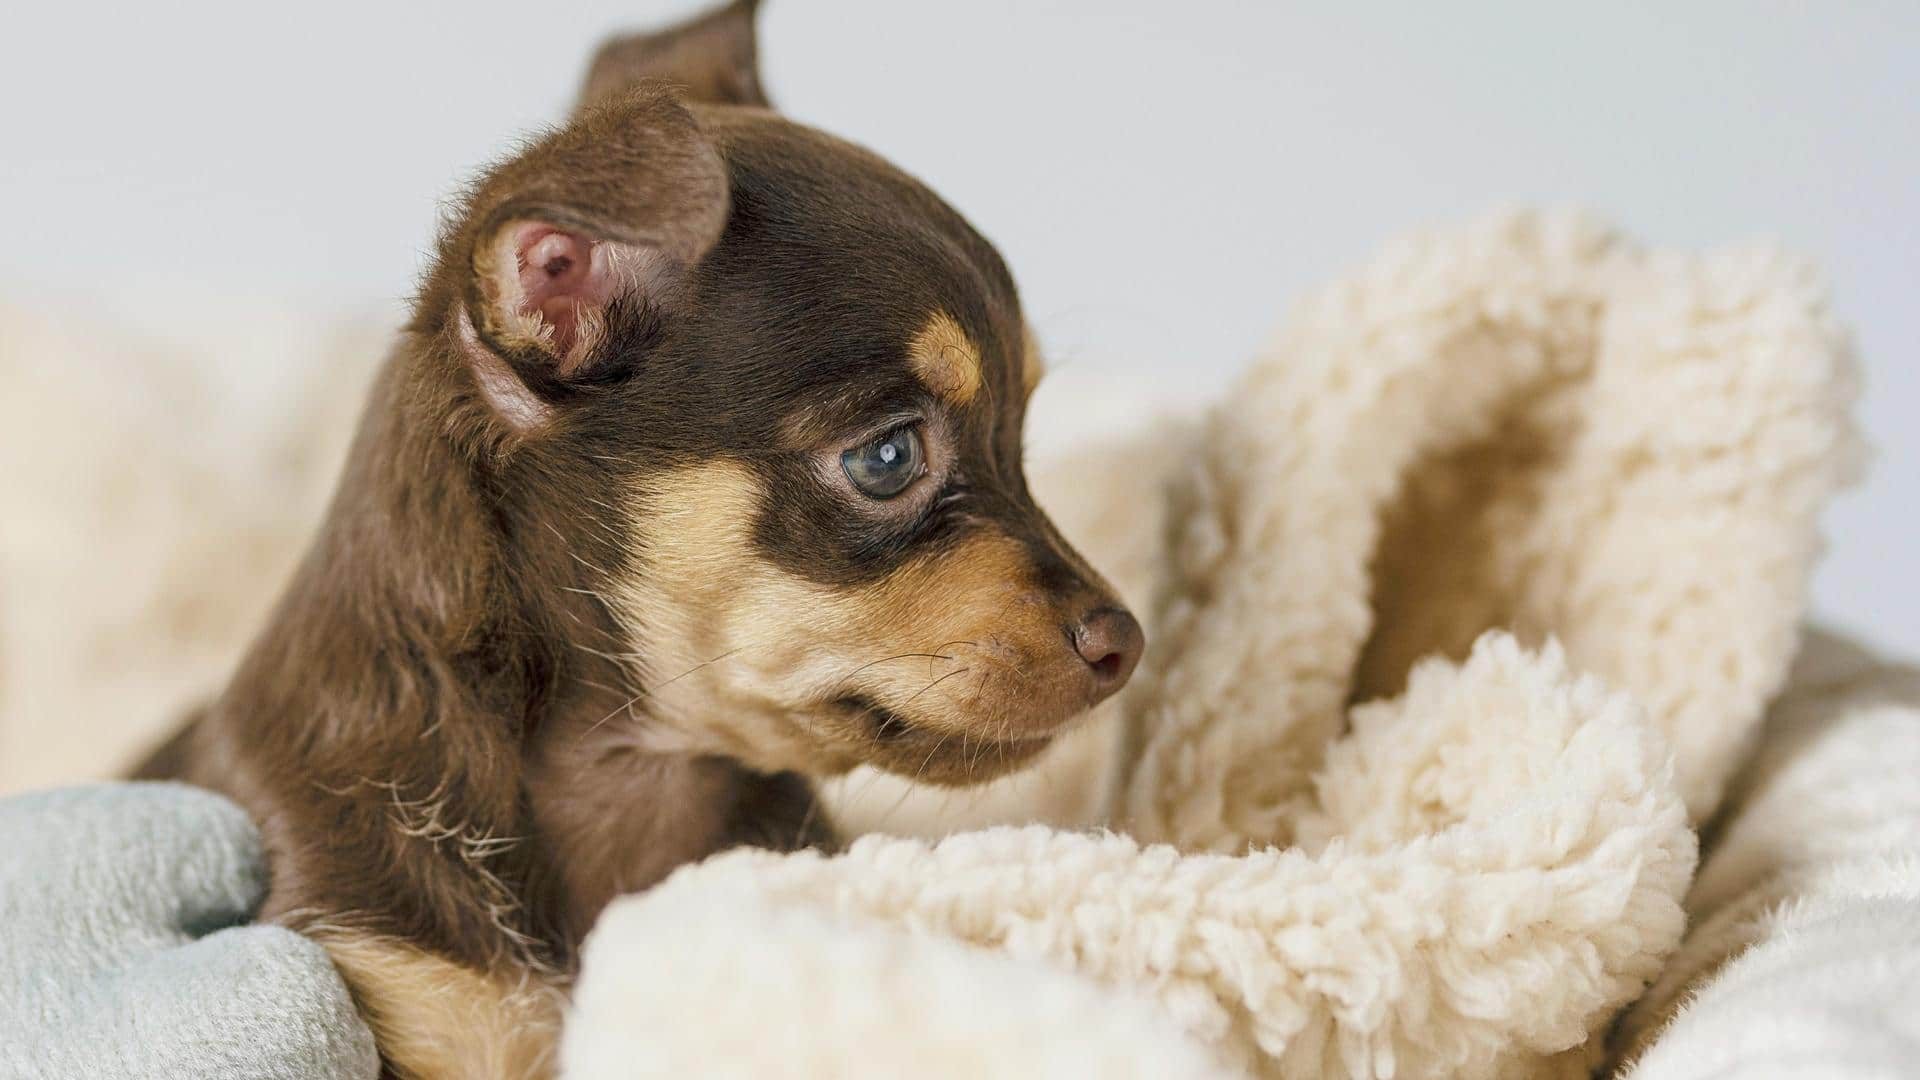 Expert shares how you can take care of newborn puppies